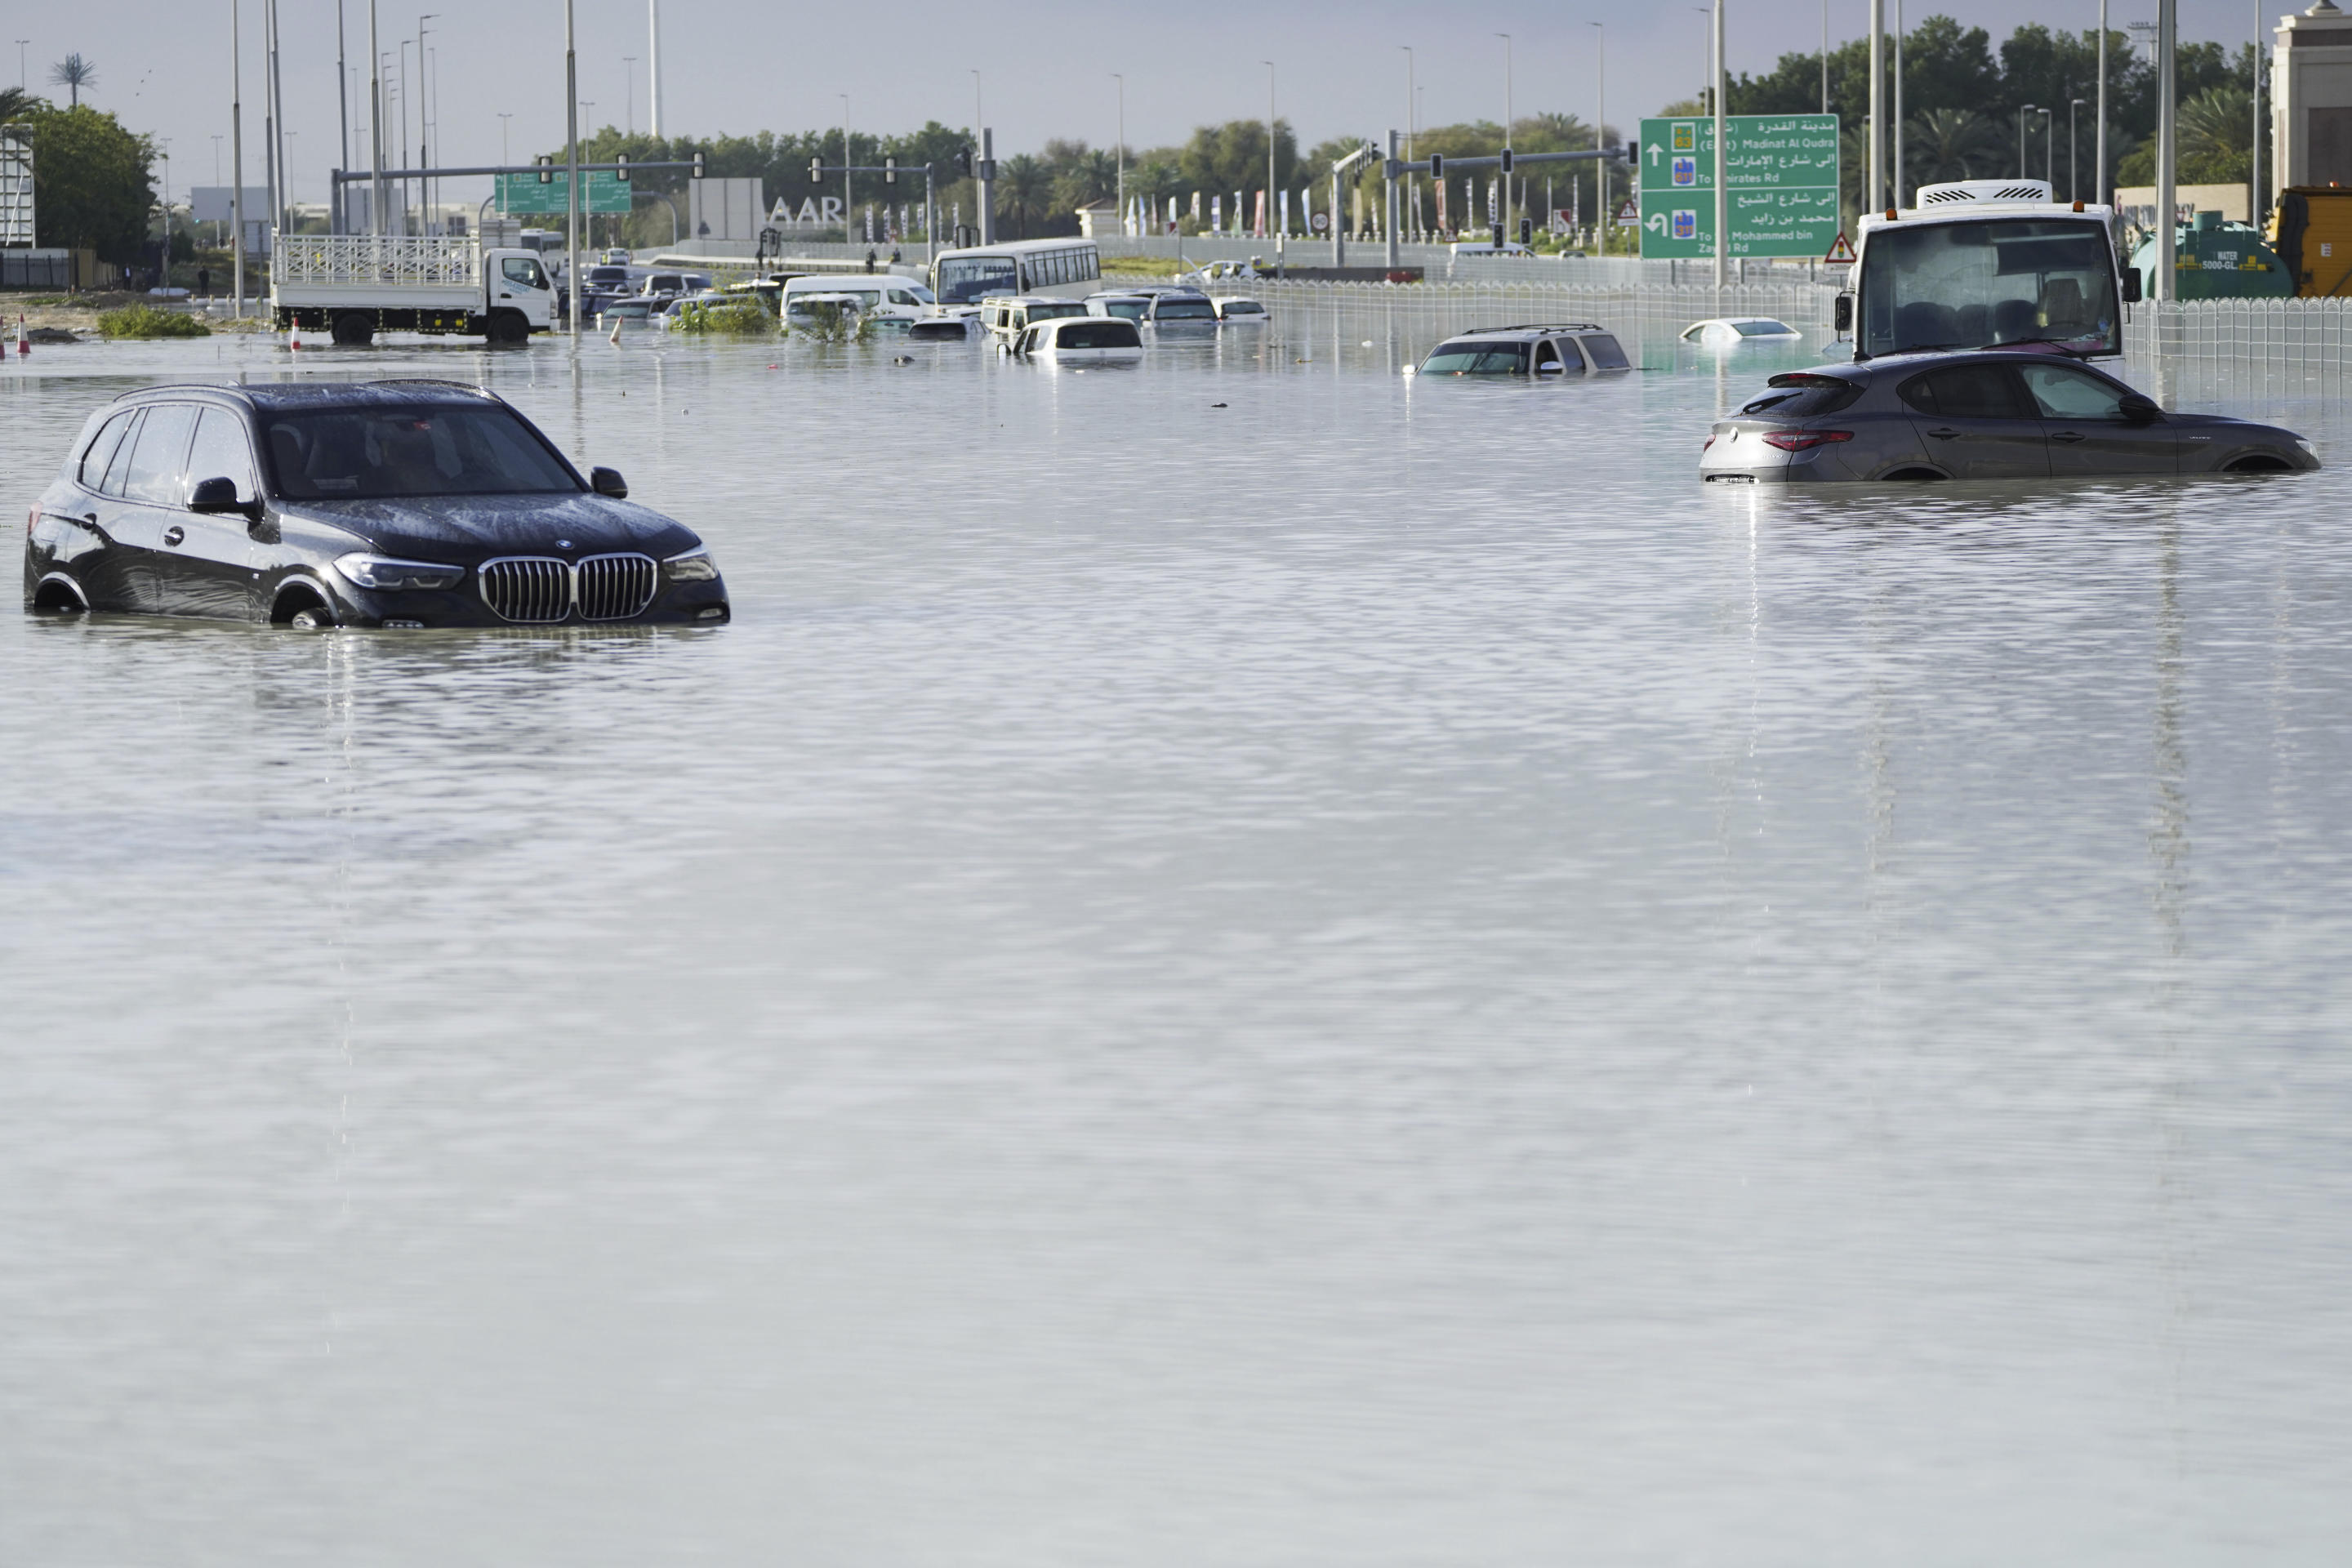 Abandoned vehicles are seen submerged in floodwaters on a major road in Dubai.